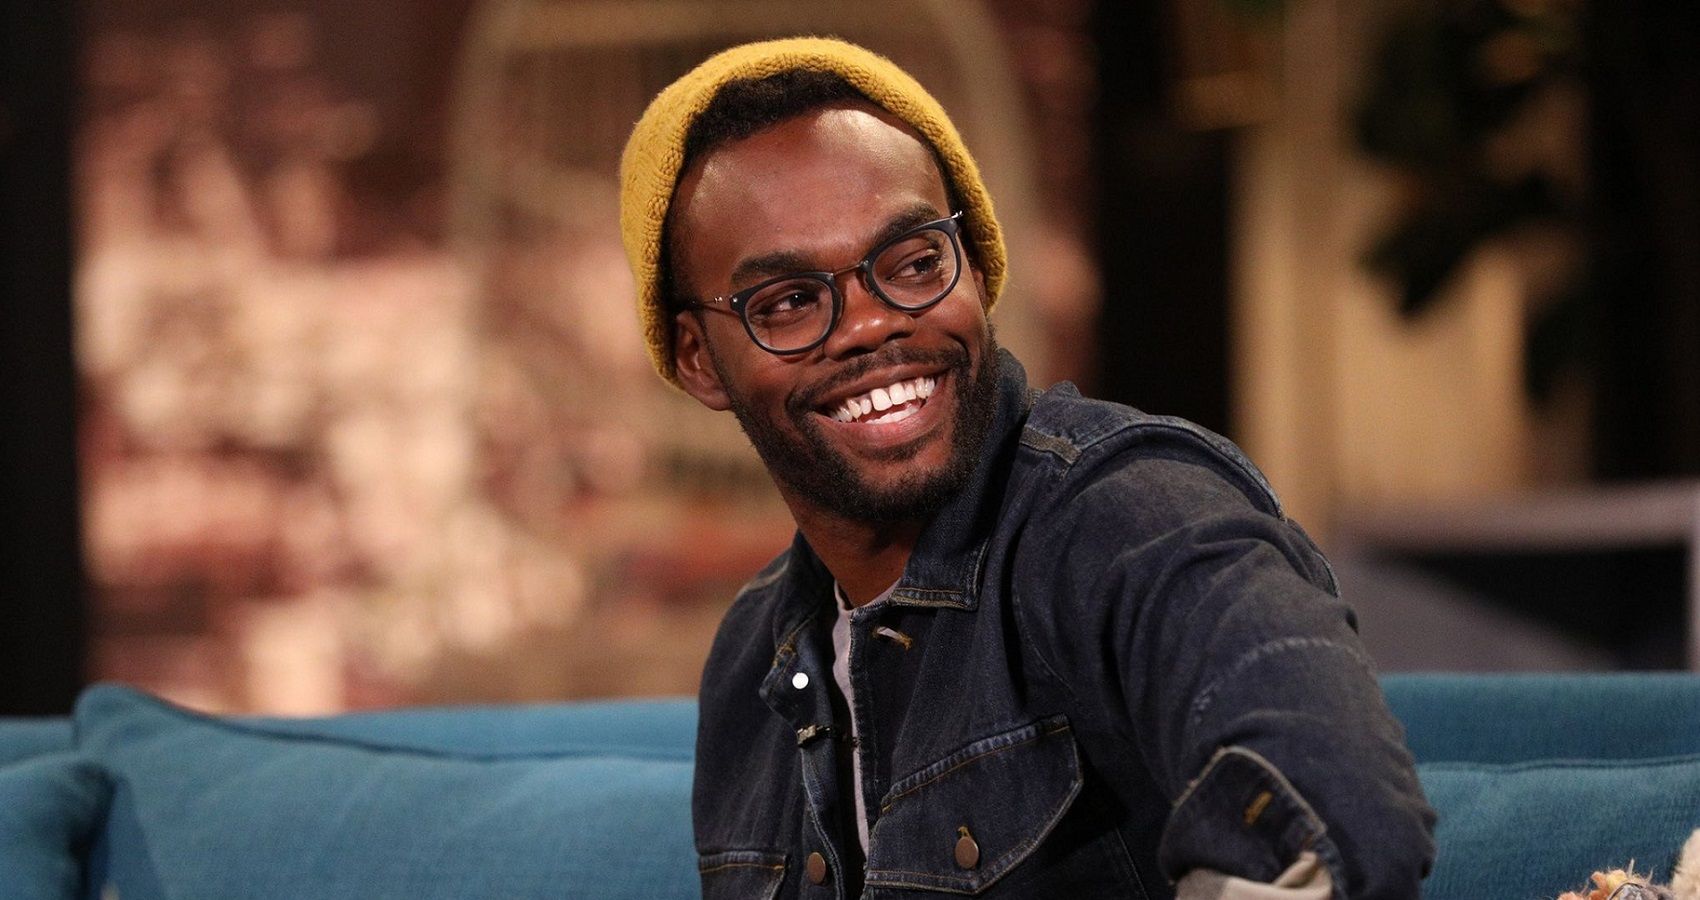 William Jackson Harper Smiling during an interview